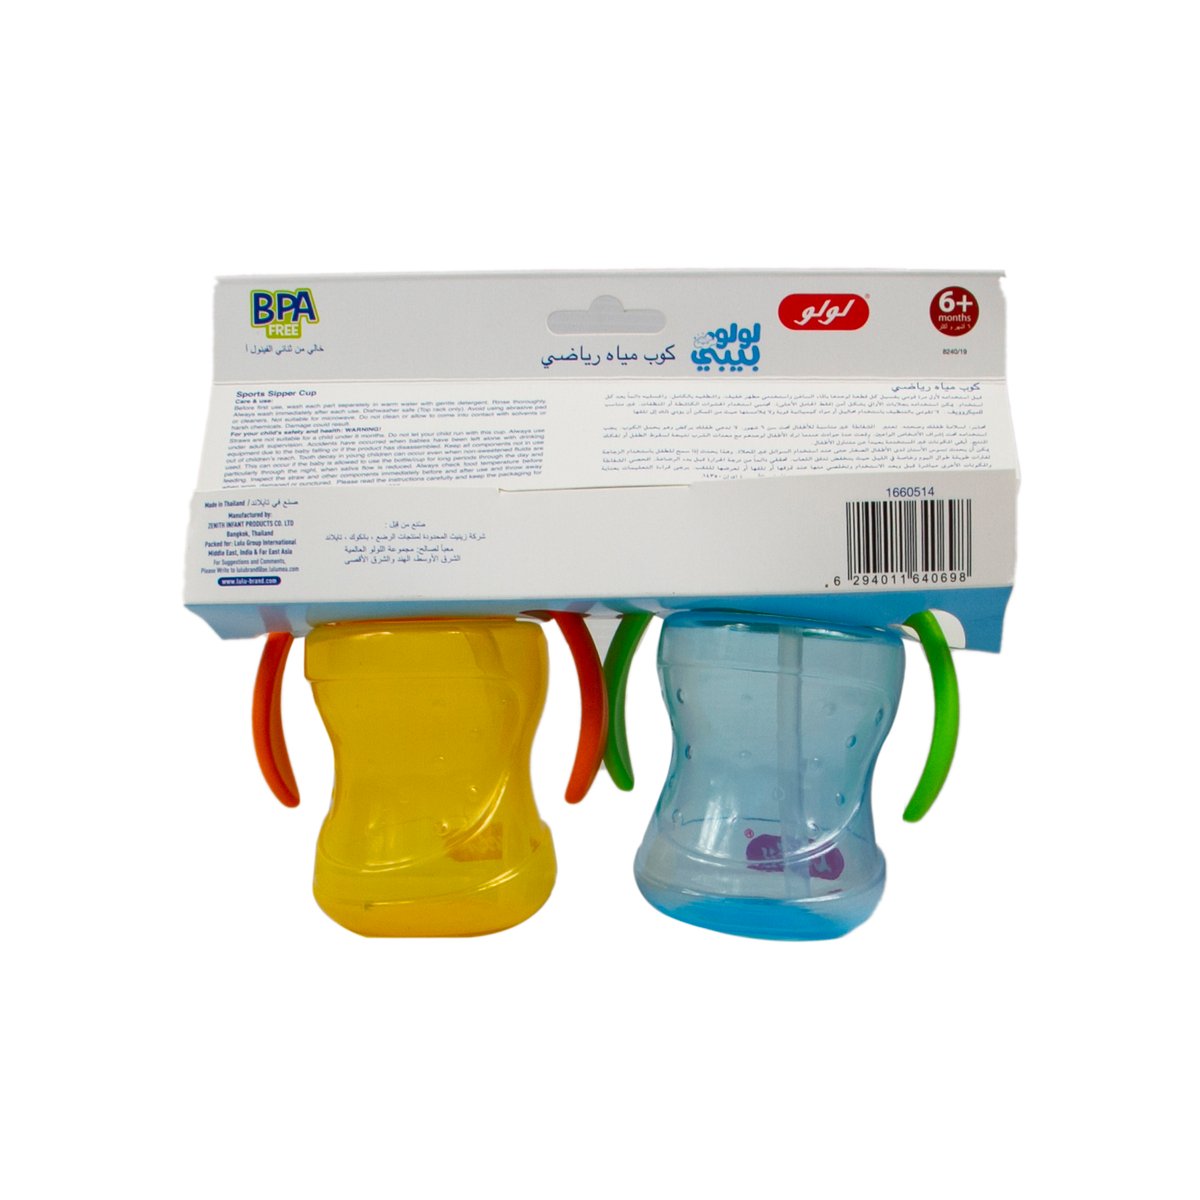 LuLu Baby Sports Sipper Cup 2 pcs